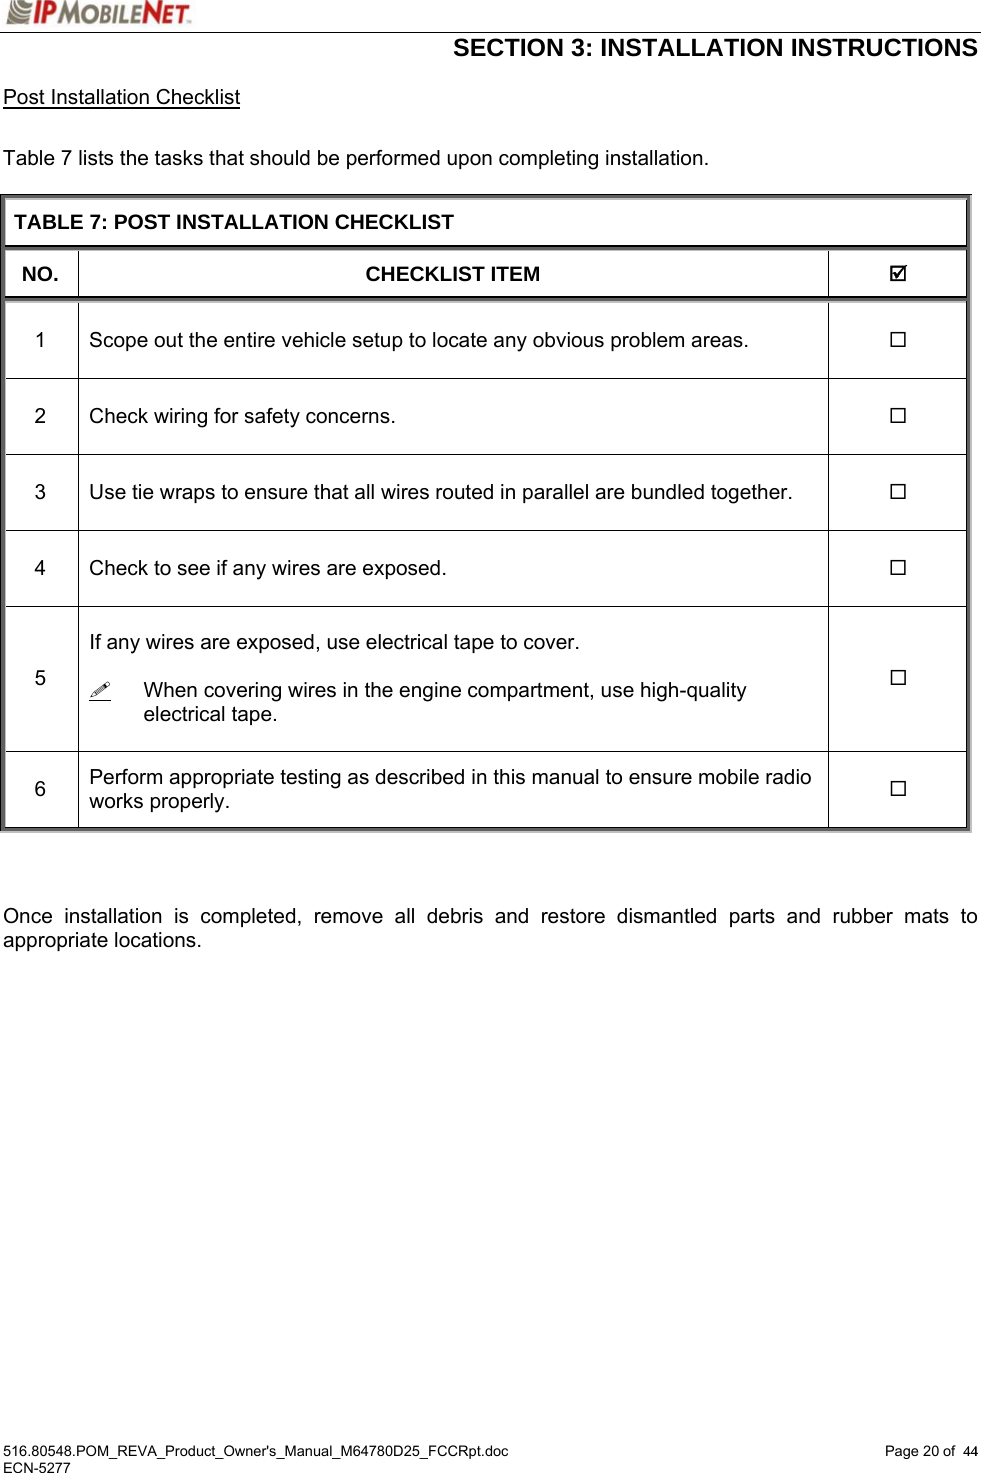  SECTION 3: INSTALLATION INSTRUCTIONS  516.80548.POM_REVA_Product_Owner&apos;s_Manual_M64780D25_FCCRpt.doc Page 20 of  44 ECN-5277  44Post Installation Checklist  Table 7 lists the tasks that should be performed upon completing installation.  TABLE 7: POST INSTALLATION CHECKLIST NO. CHECKLIST ITEM  ; 1  Scope out the entire vehicle setup to locate any obvious problem areas.   2  Check wiring for safety concerns.   3  Use tie wraps to ensure that all wires routed in parallel are bundled together.   4  Check to see if any wires are exposed.   5  If any wires are exposed, use electrical tape to cover.    When covering wires in the engine compartment, use high-quality electrical tape.   6  Perform appropriate testing as described in this manual to ensure mobile radio works properly.      Once installation is completed, remove all debris and restore dismantled parts and rubber mats to appropriate locations.  